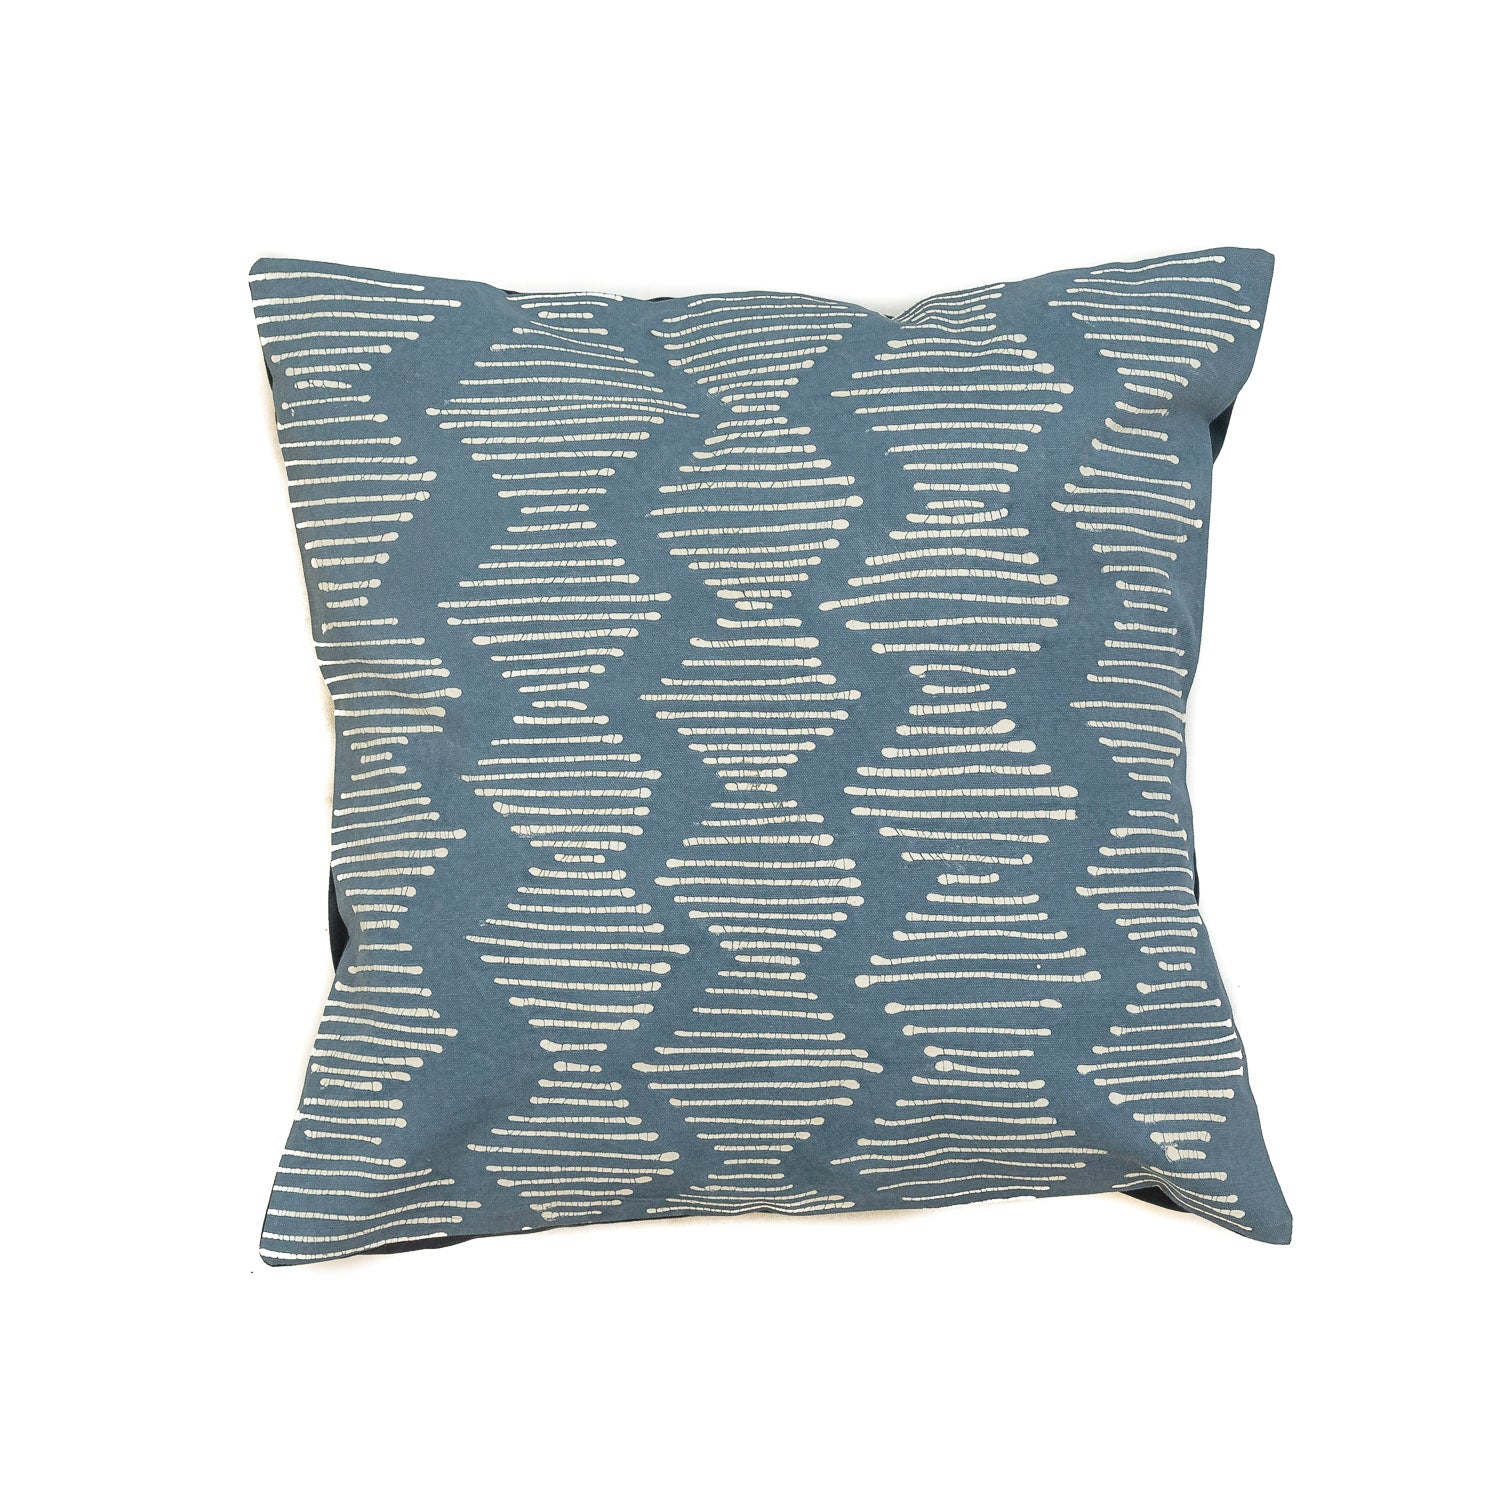 Tribal Cloth blue Line Wave Cushion Cover, Hand Painted by TRIBAL TEXTILES - ethical Home Decor Interiors - African Made